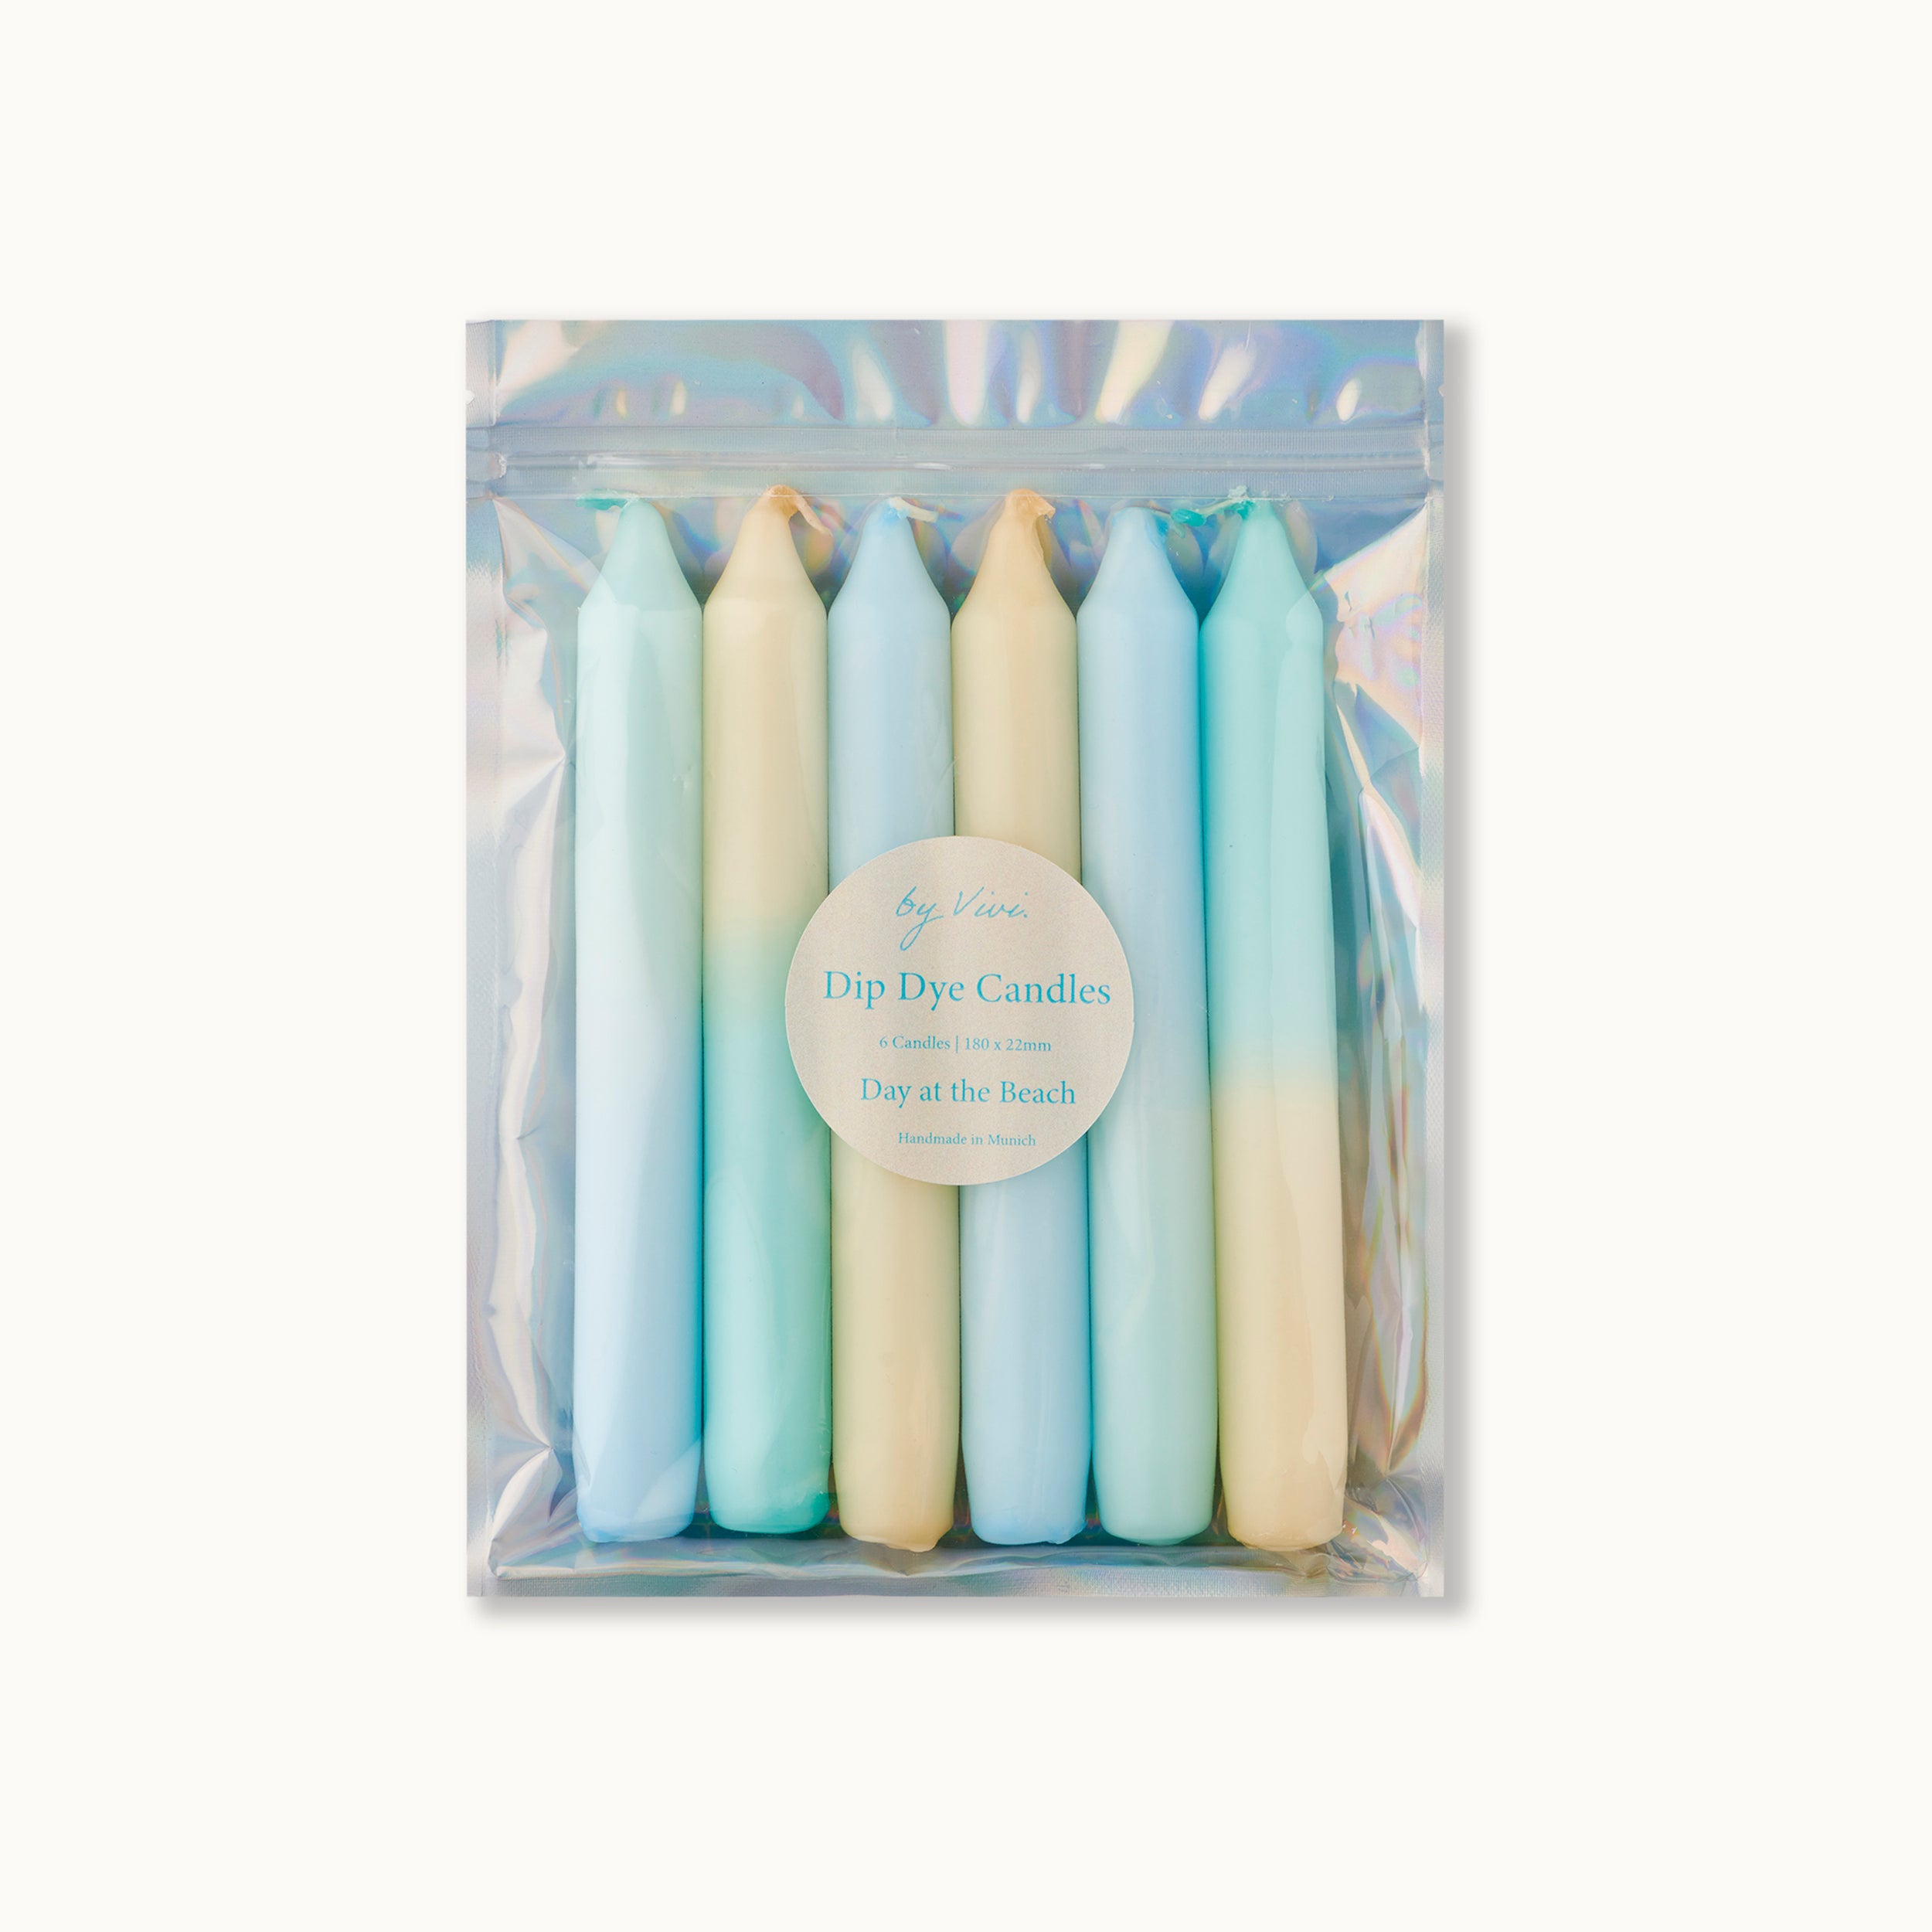 Dip Dye Candle Set: Day at the Beach